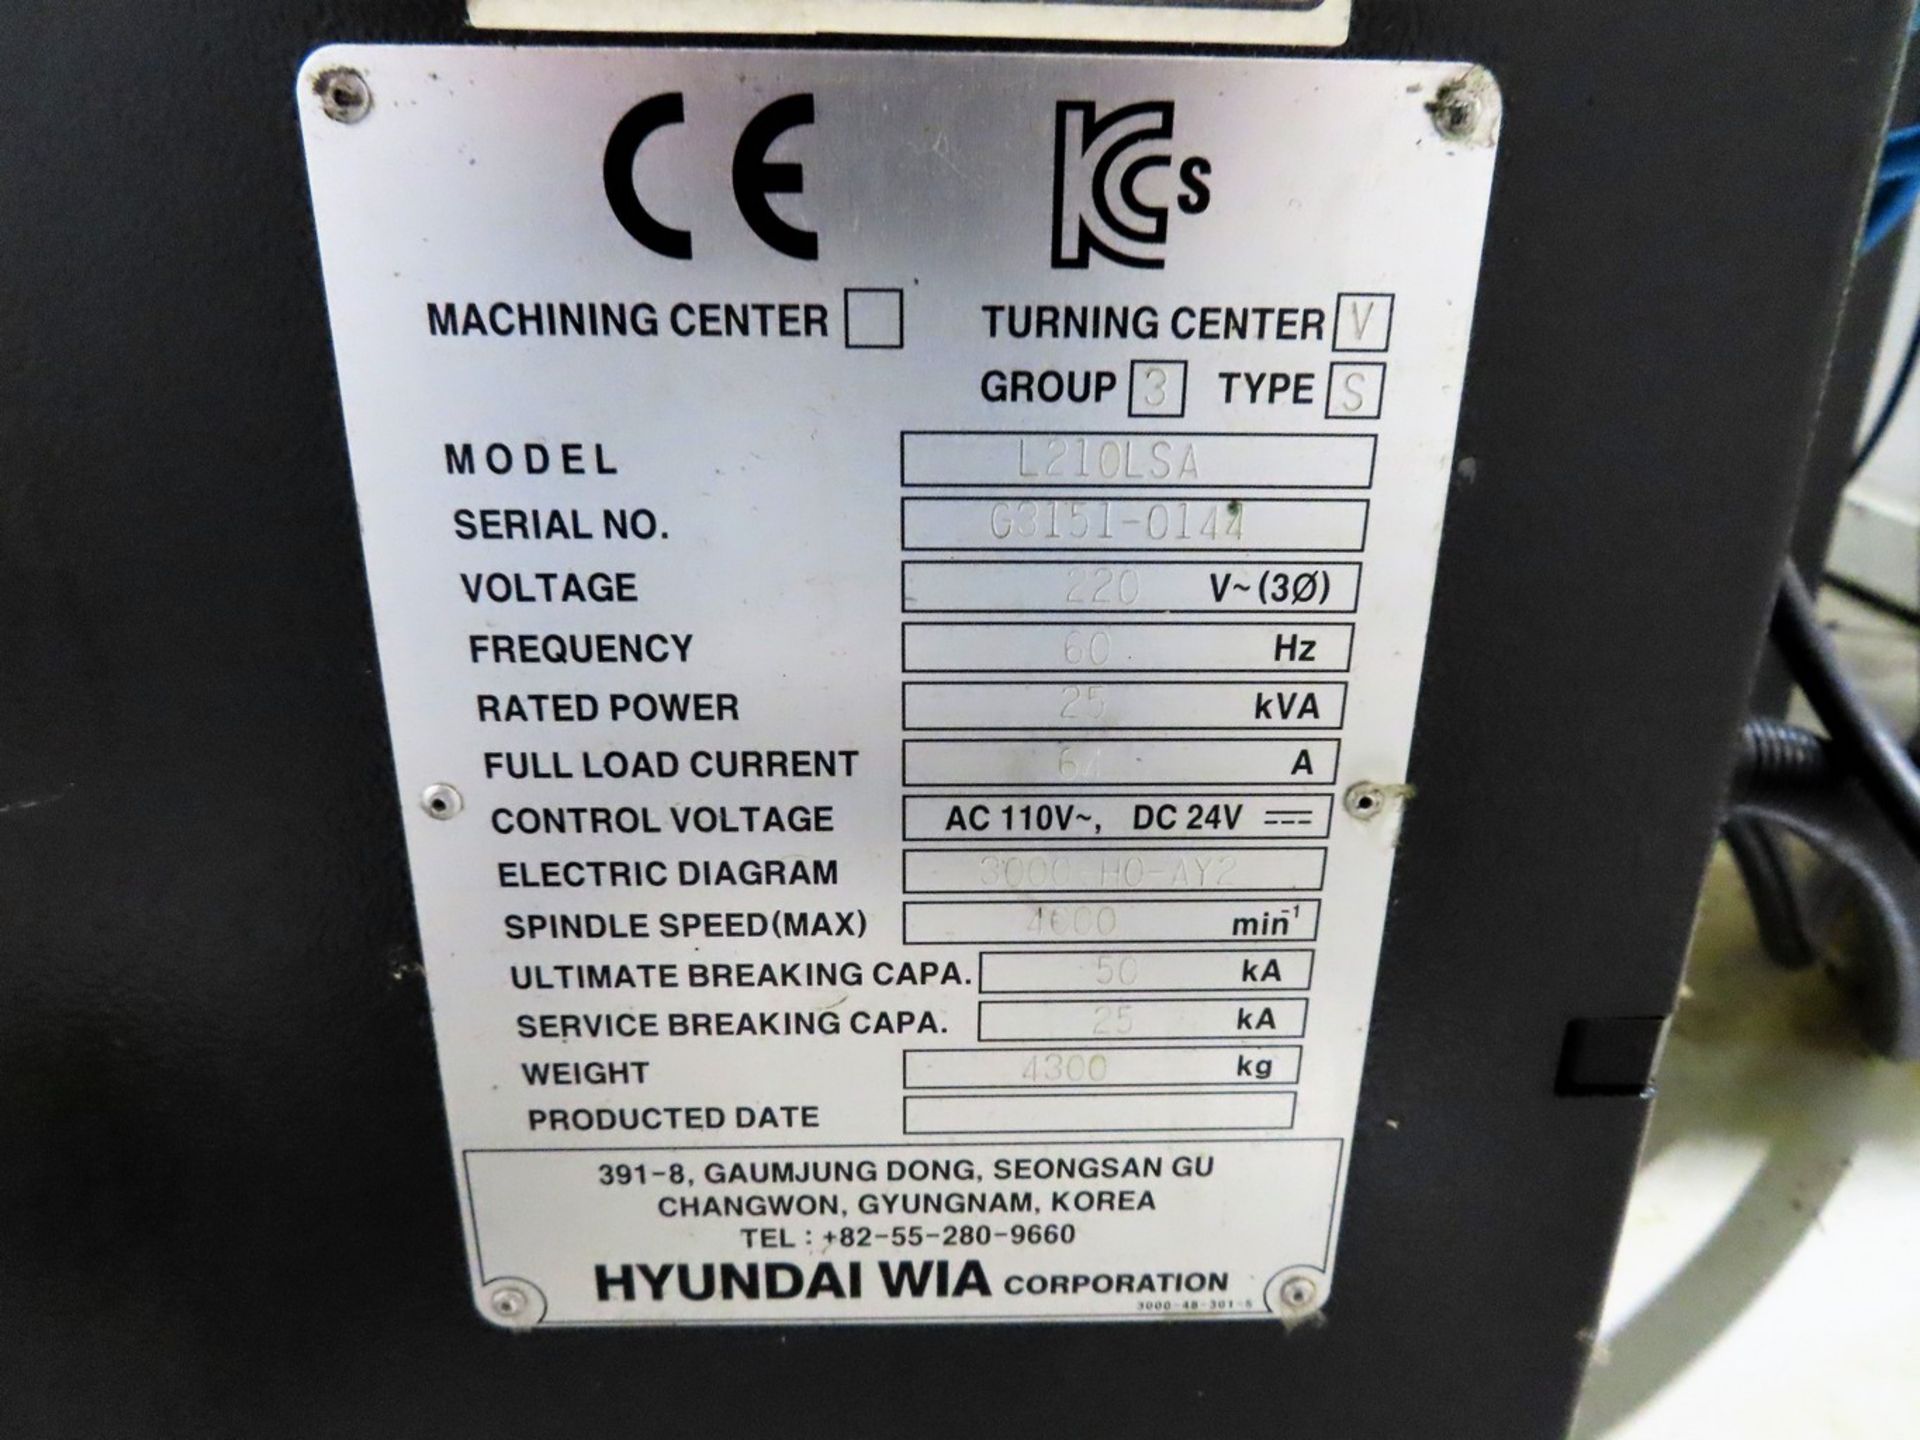 2013 Hyundai-Wia L210-LSA 6-Axis CNC Turning Center, S/N 63151-0144 - Image 8 of 10